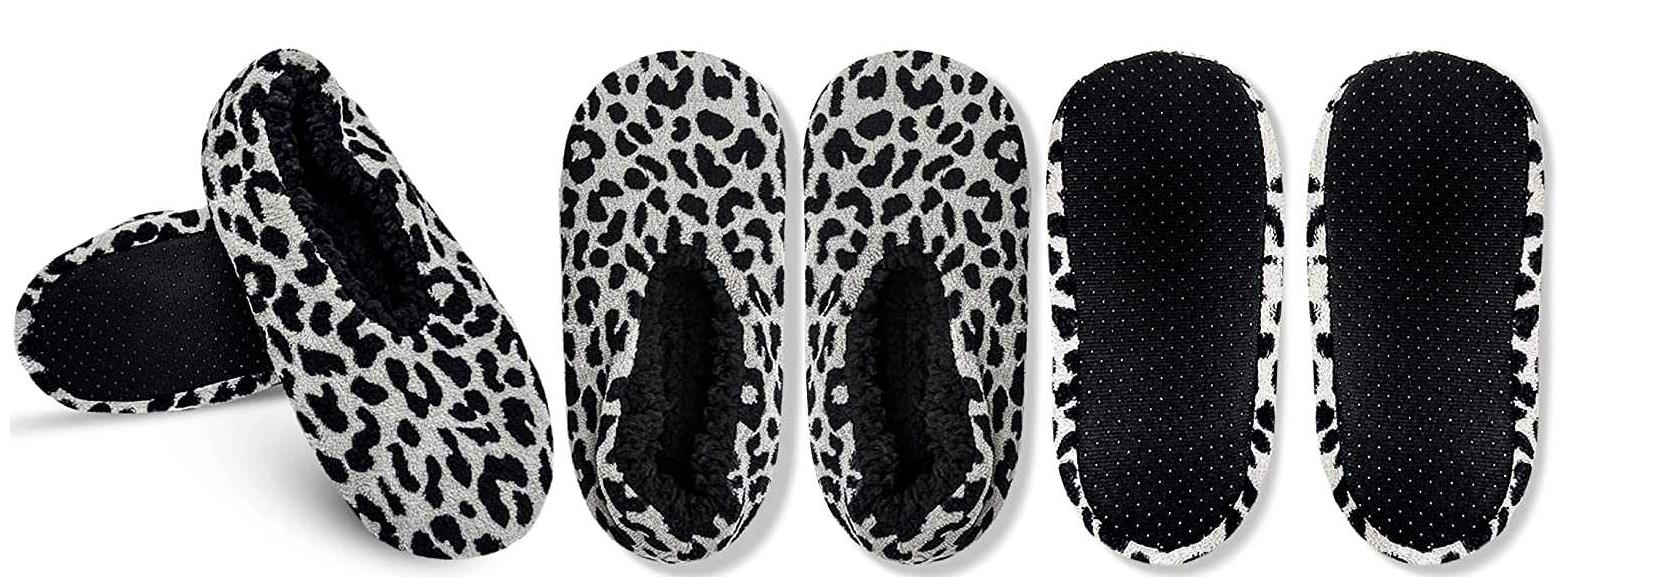 Isaac Mizrahi Leopard Sherpa Lined Slippers. 35,343 pairs. EXW Los Angeles $1.25/pair.